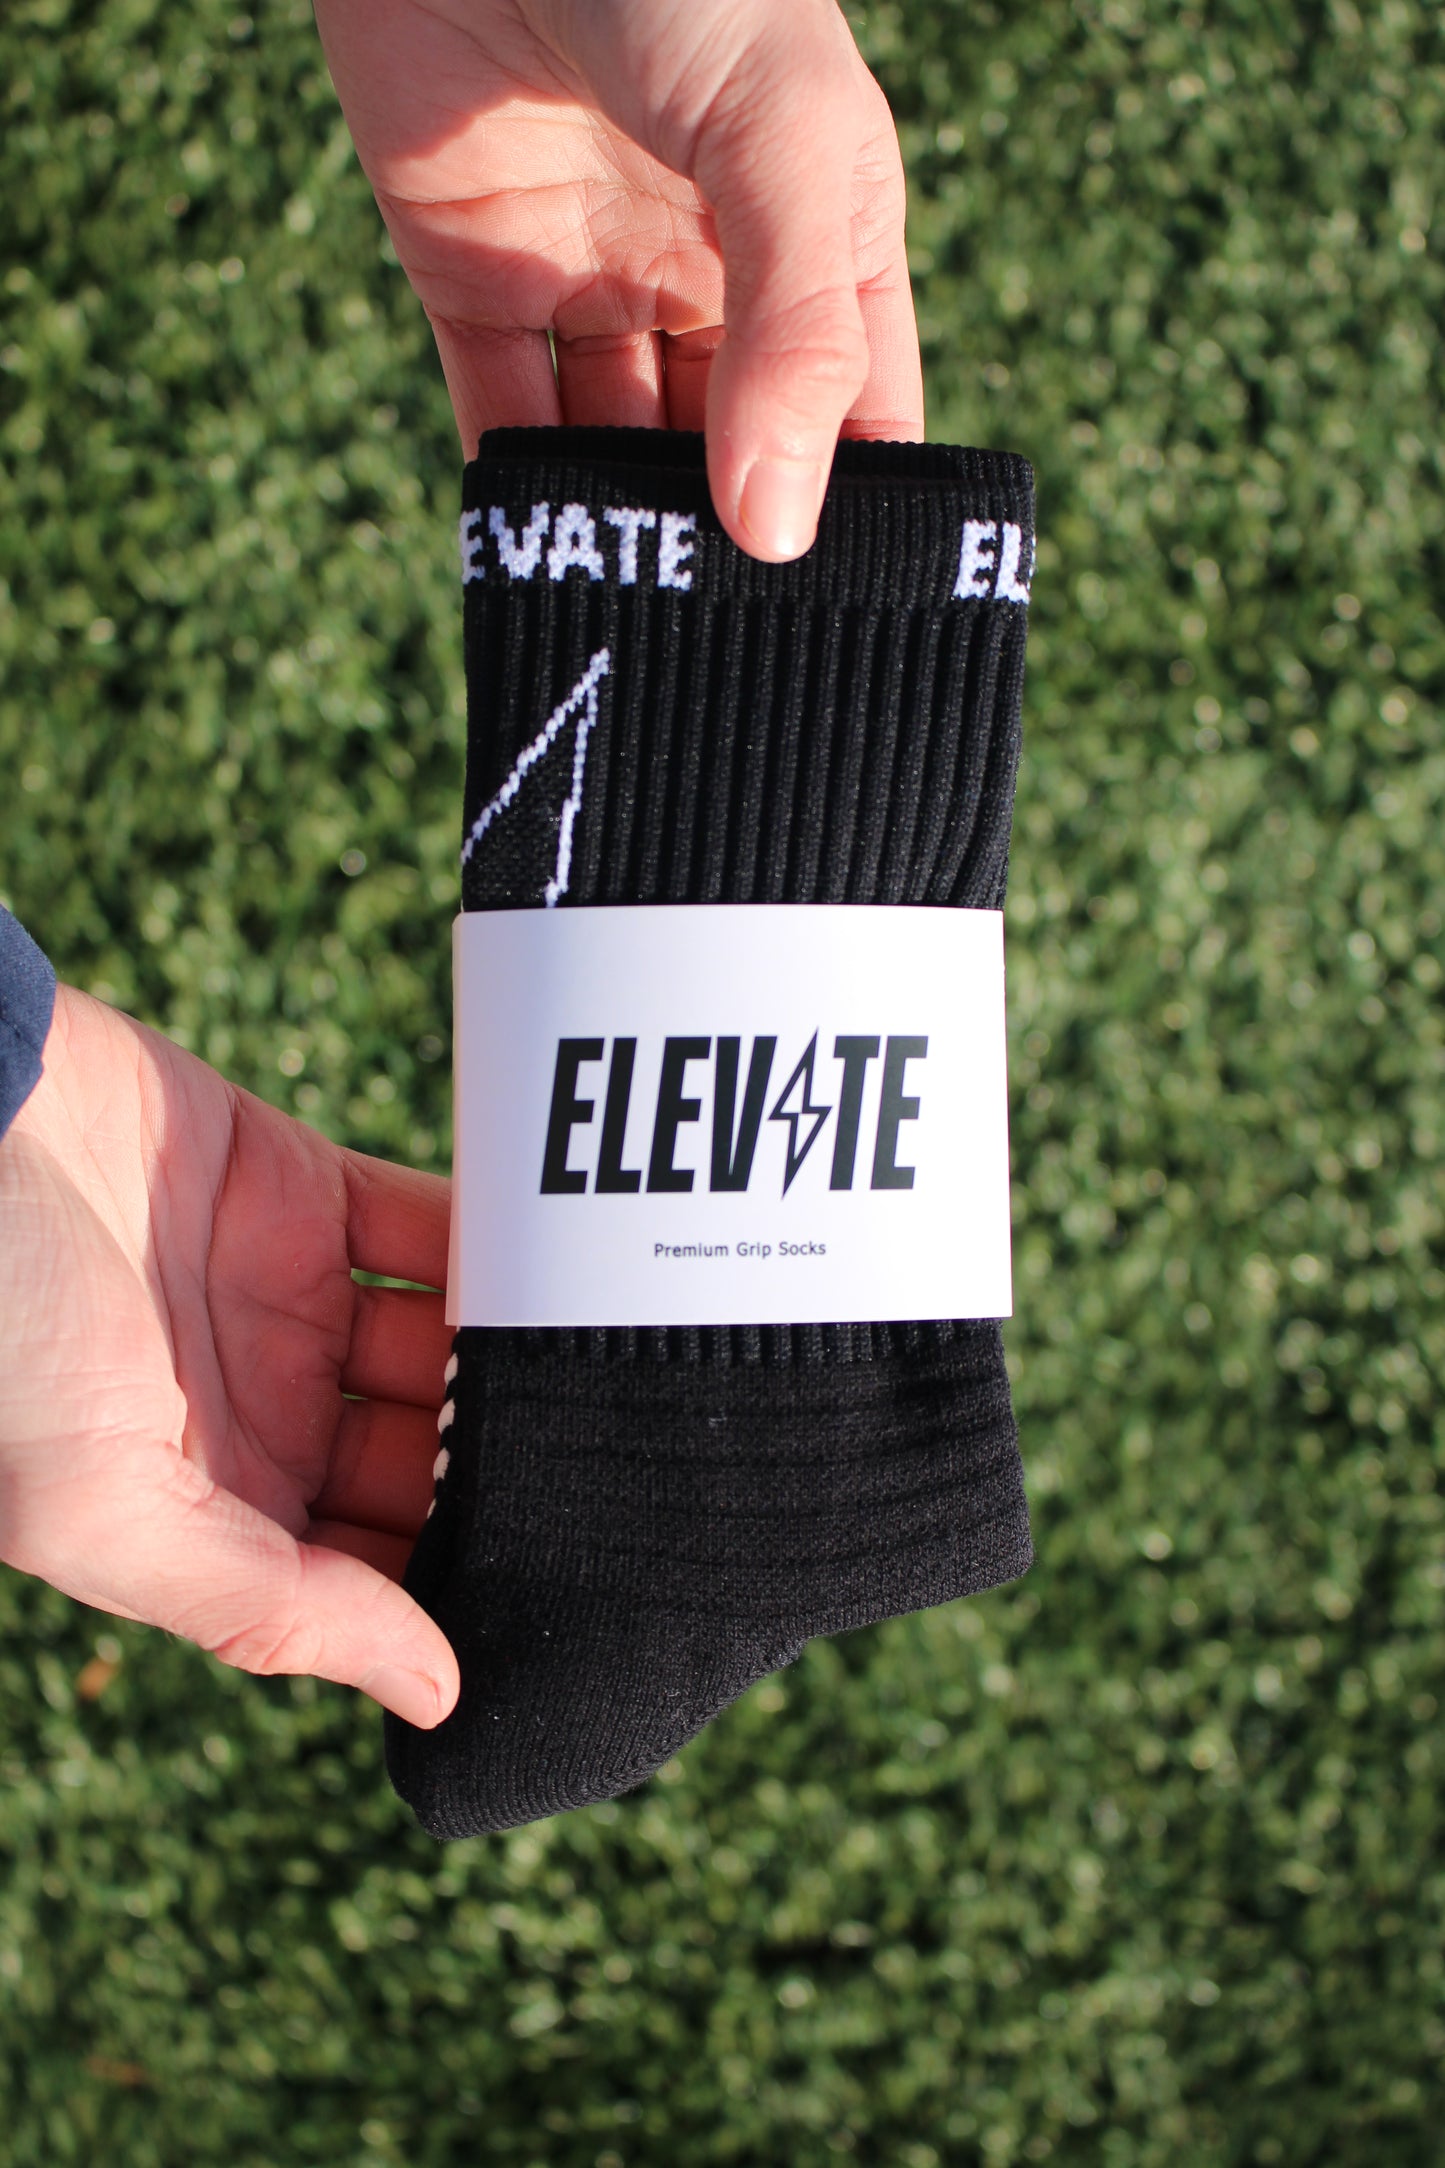 Elevate Grip Socks - Black with white grips. 